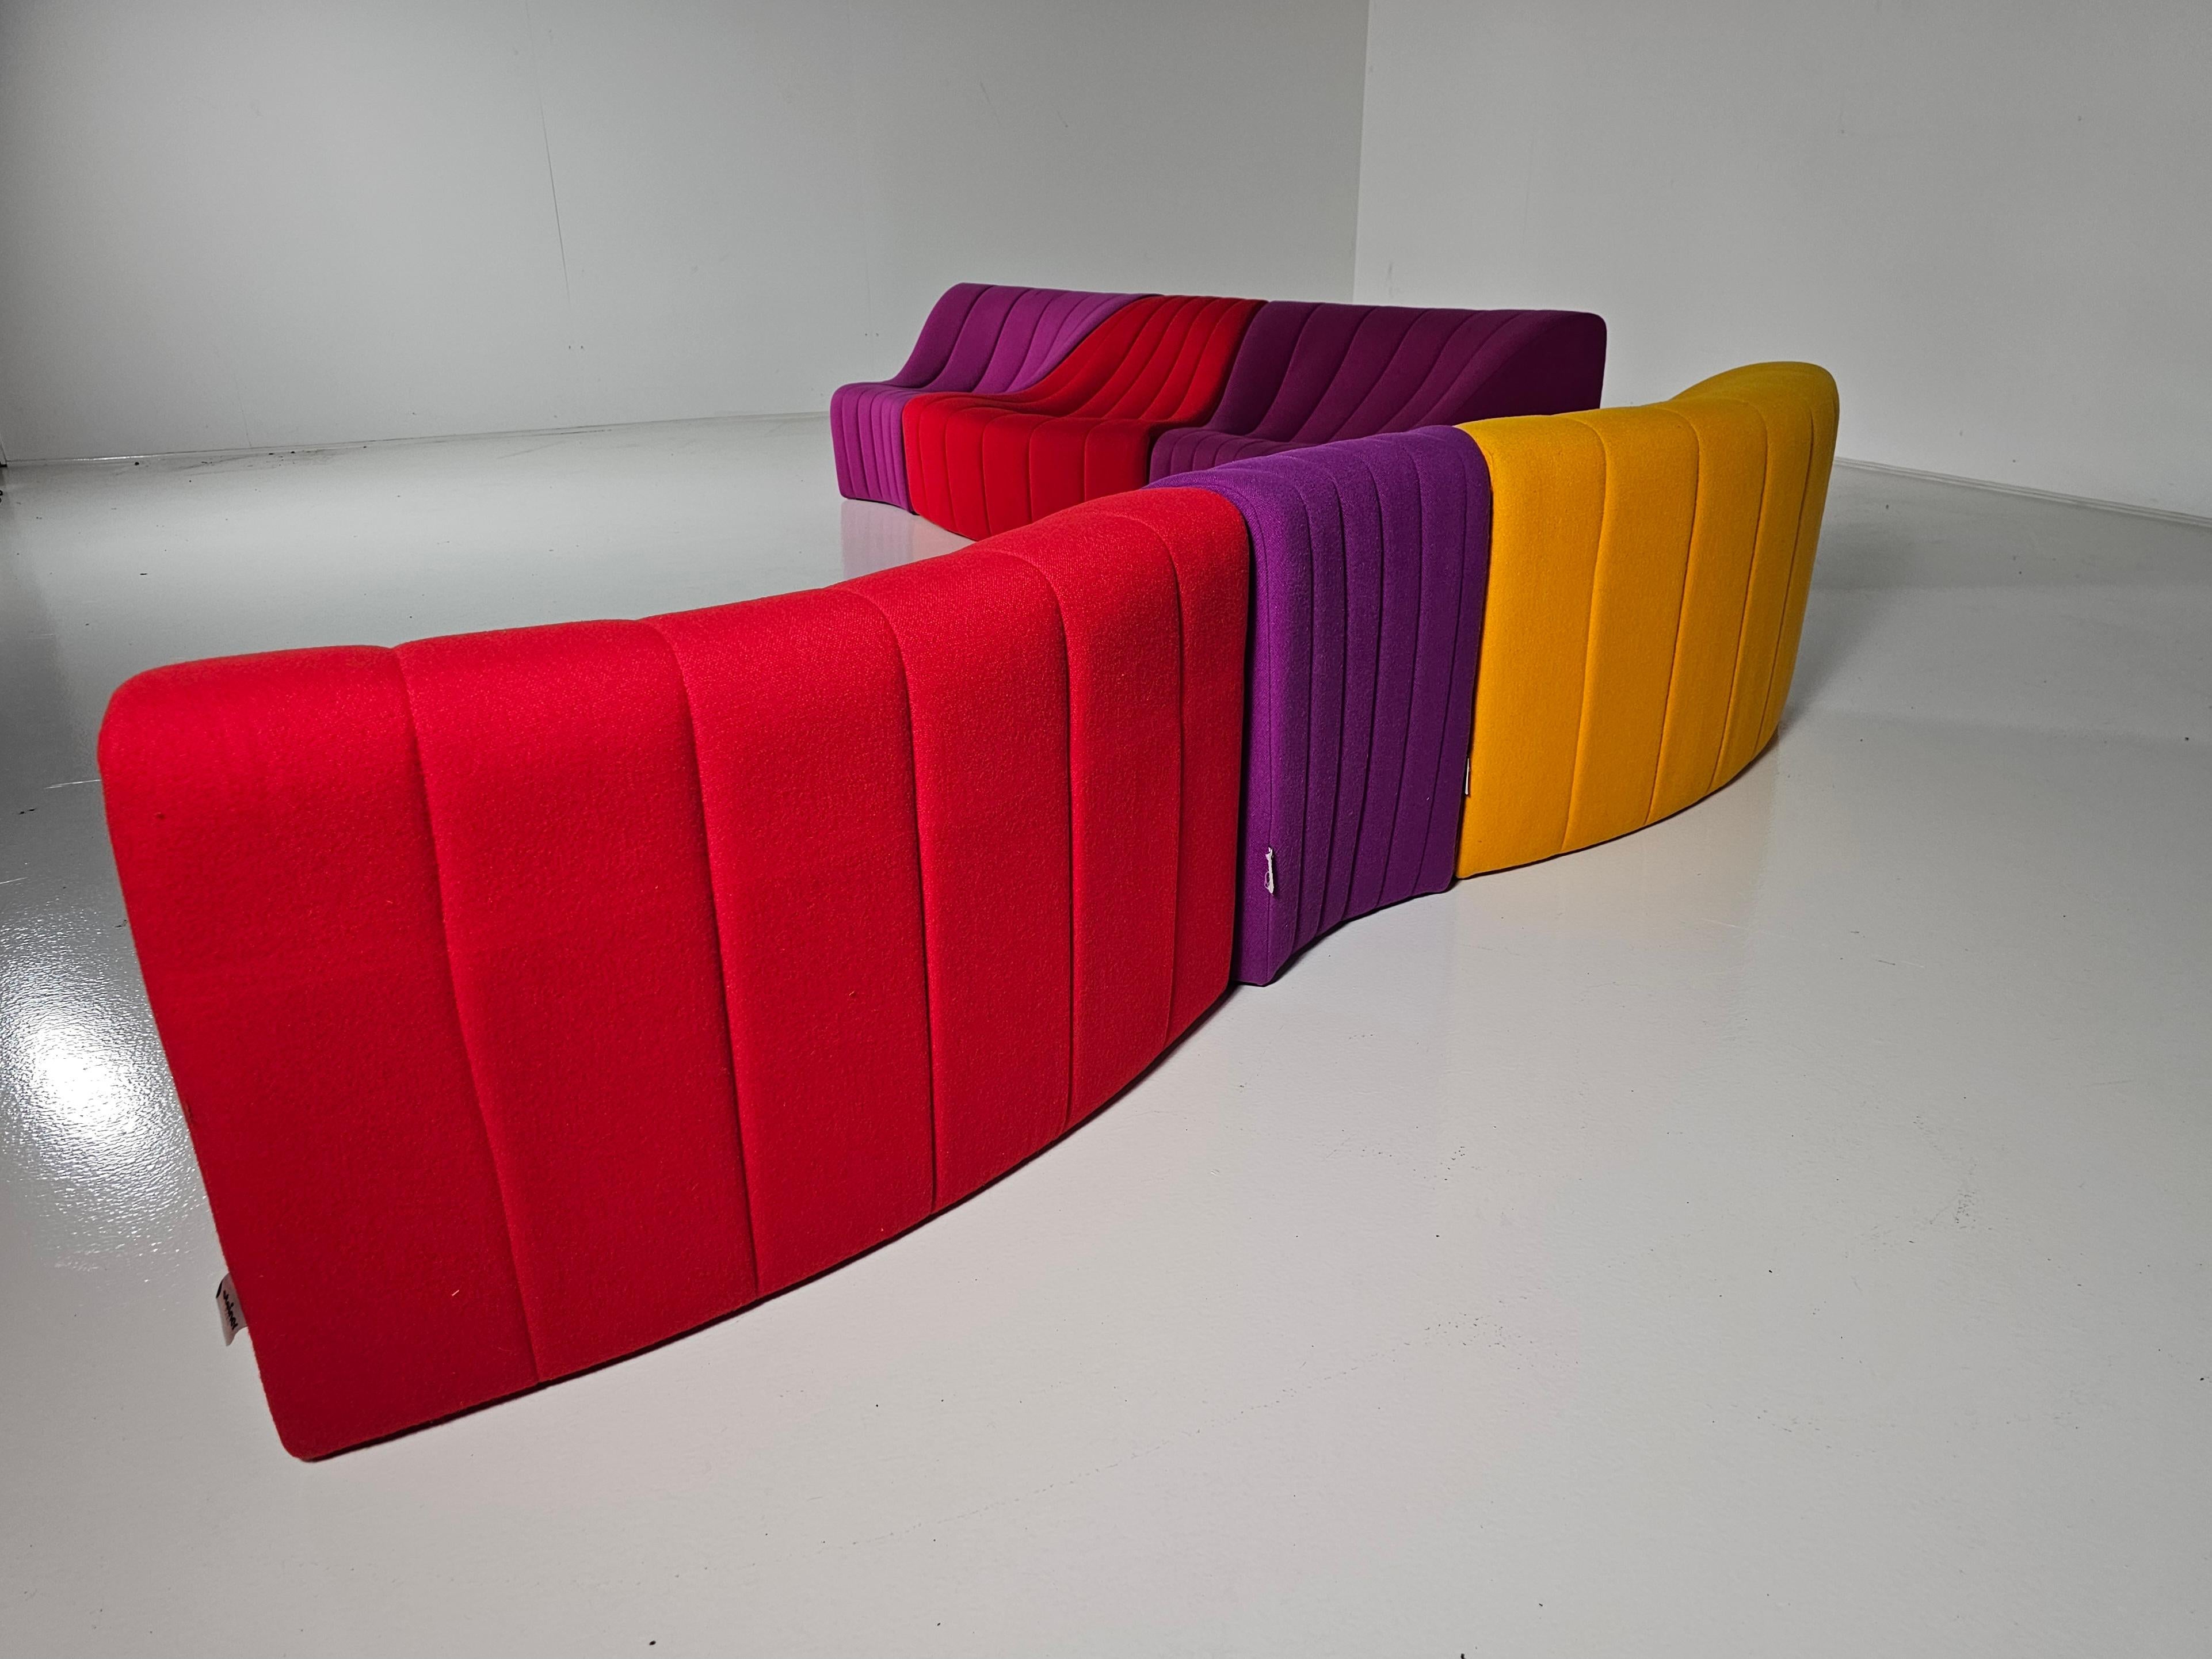 Kwok Hoi Chan 'Chromatic'  modular sofa in red, purple and yellow colors  1